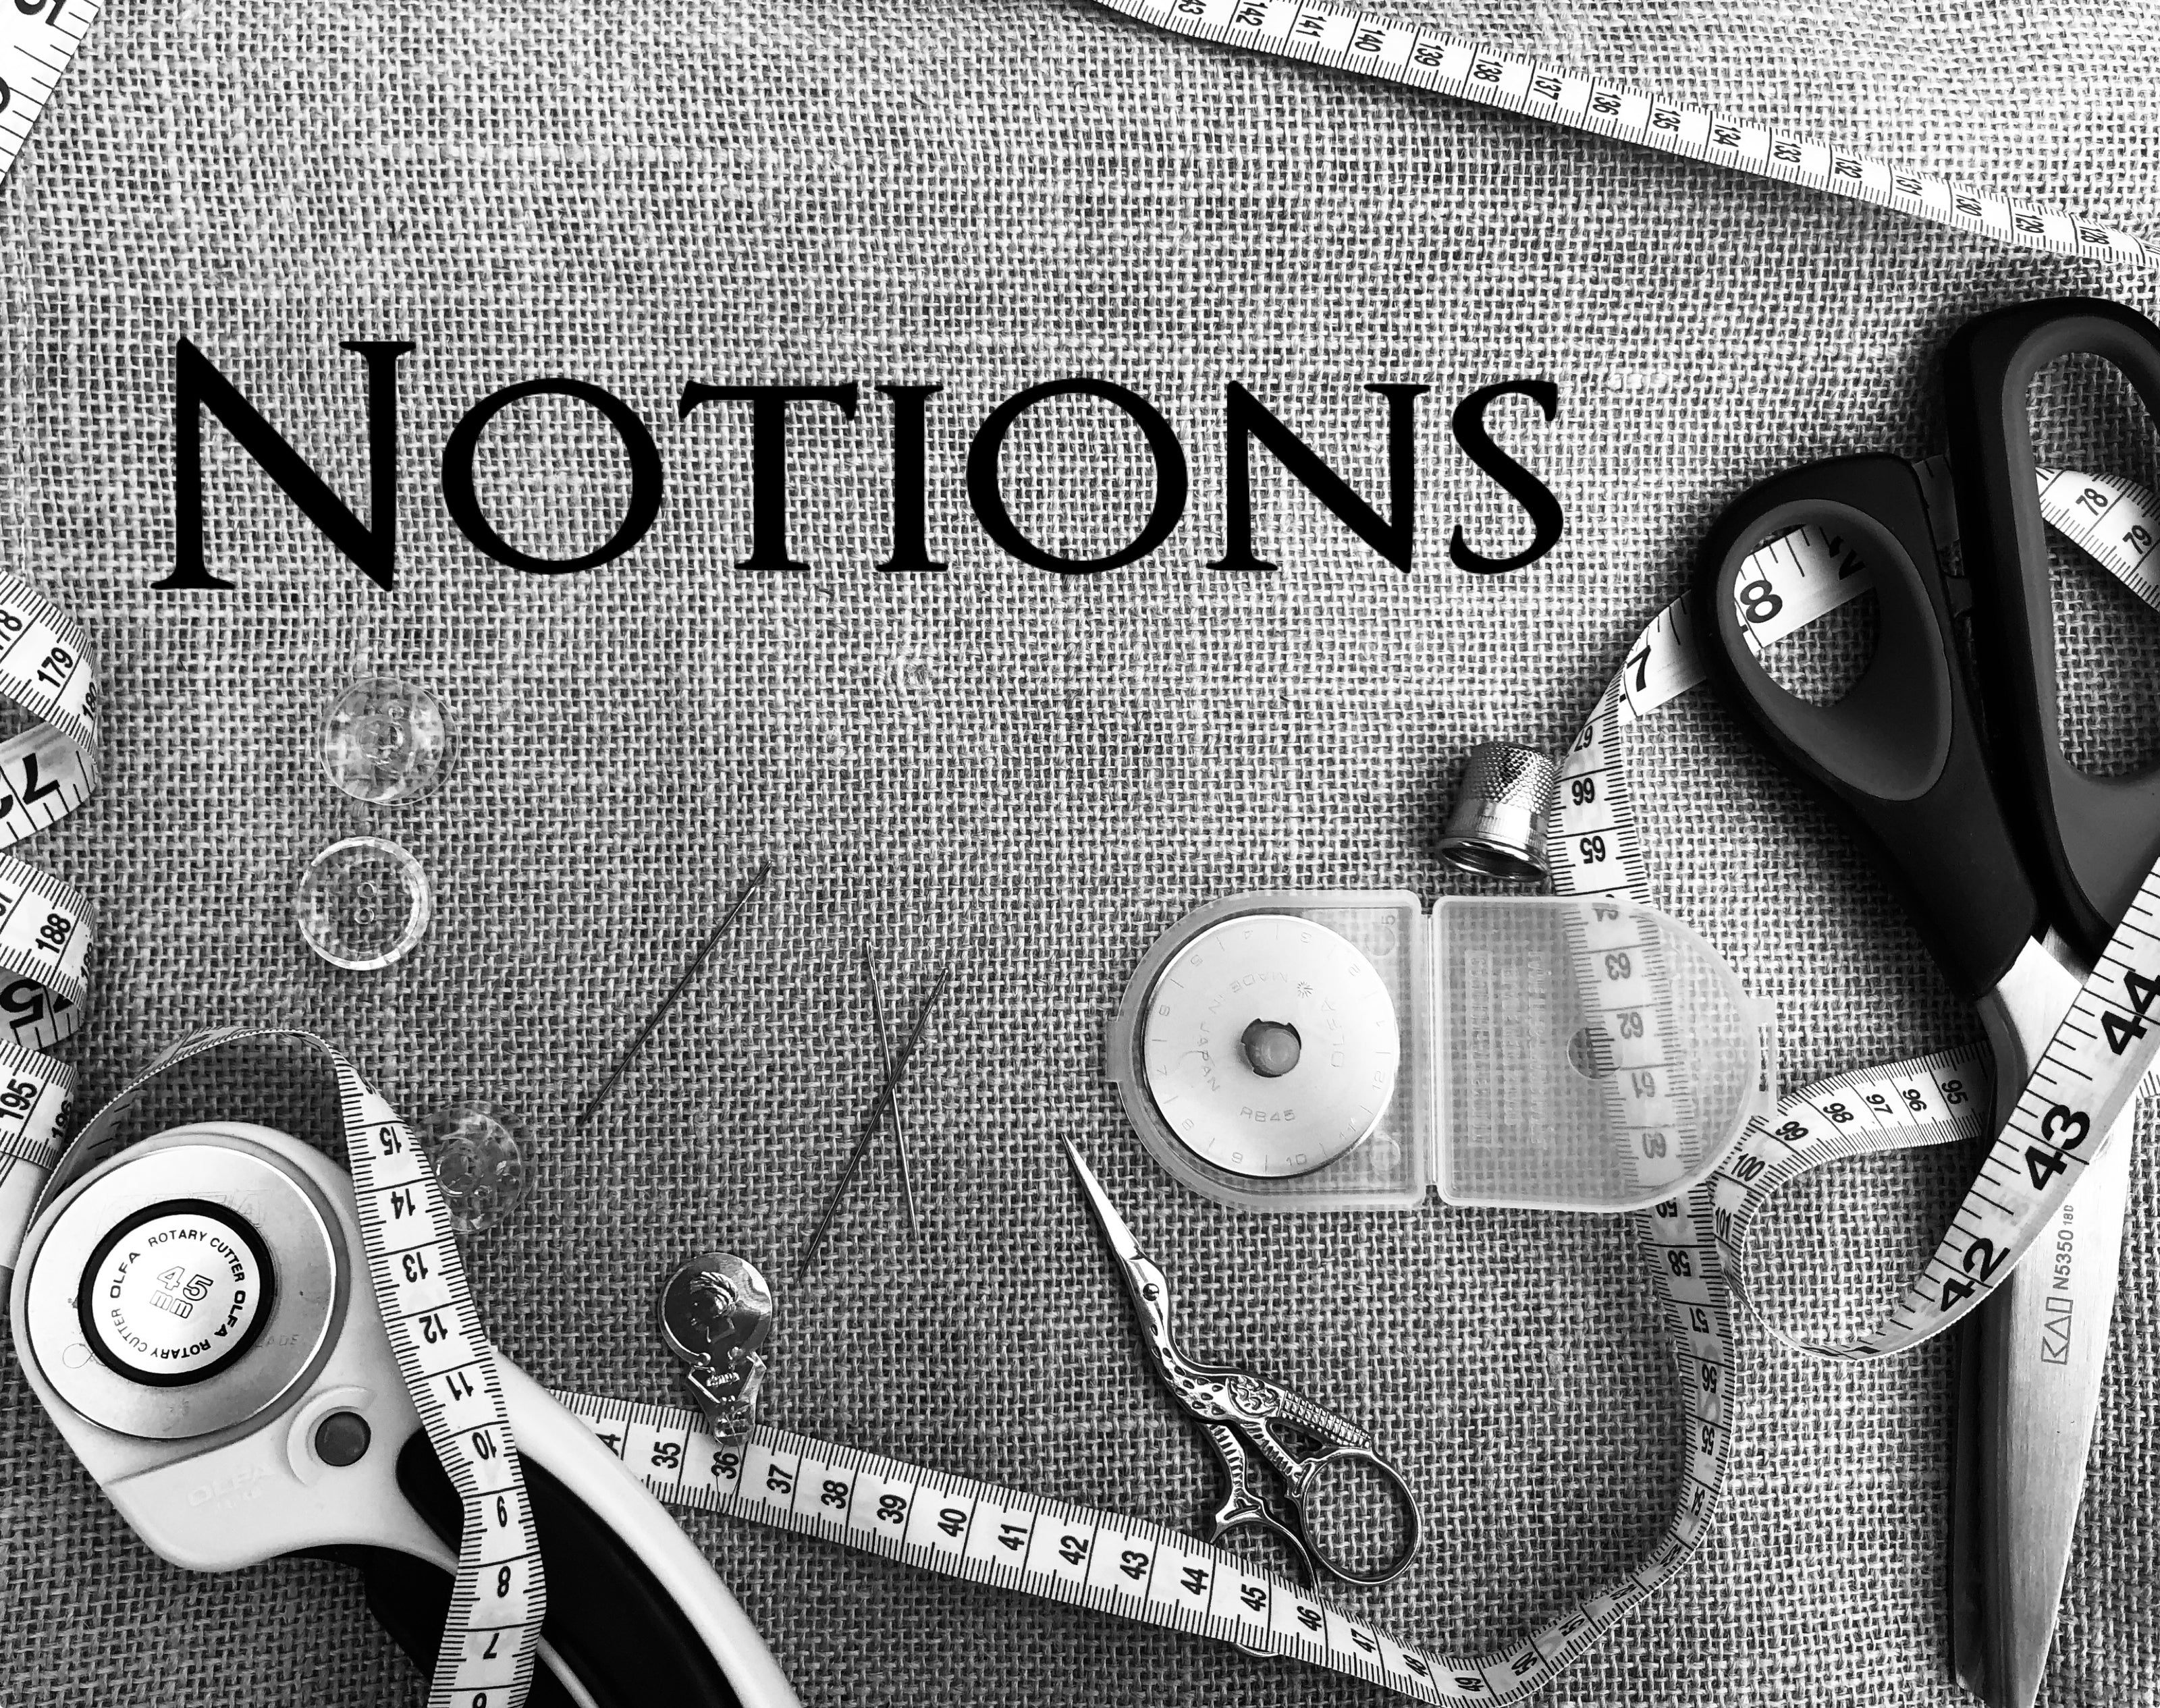 Sewing Notions